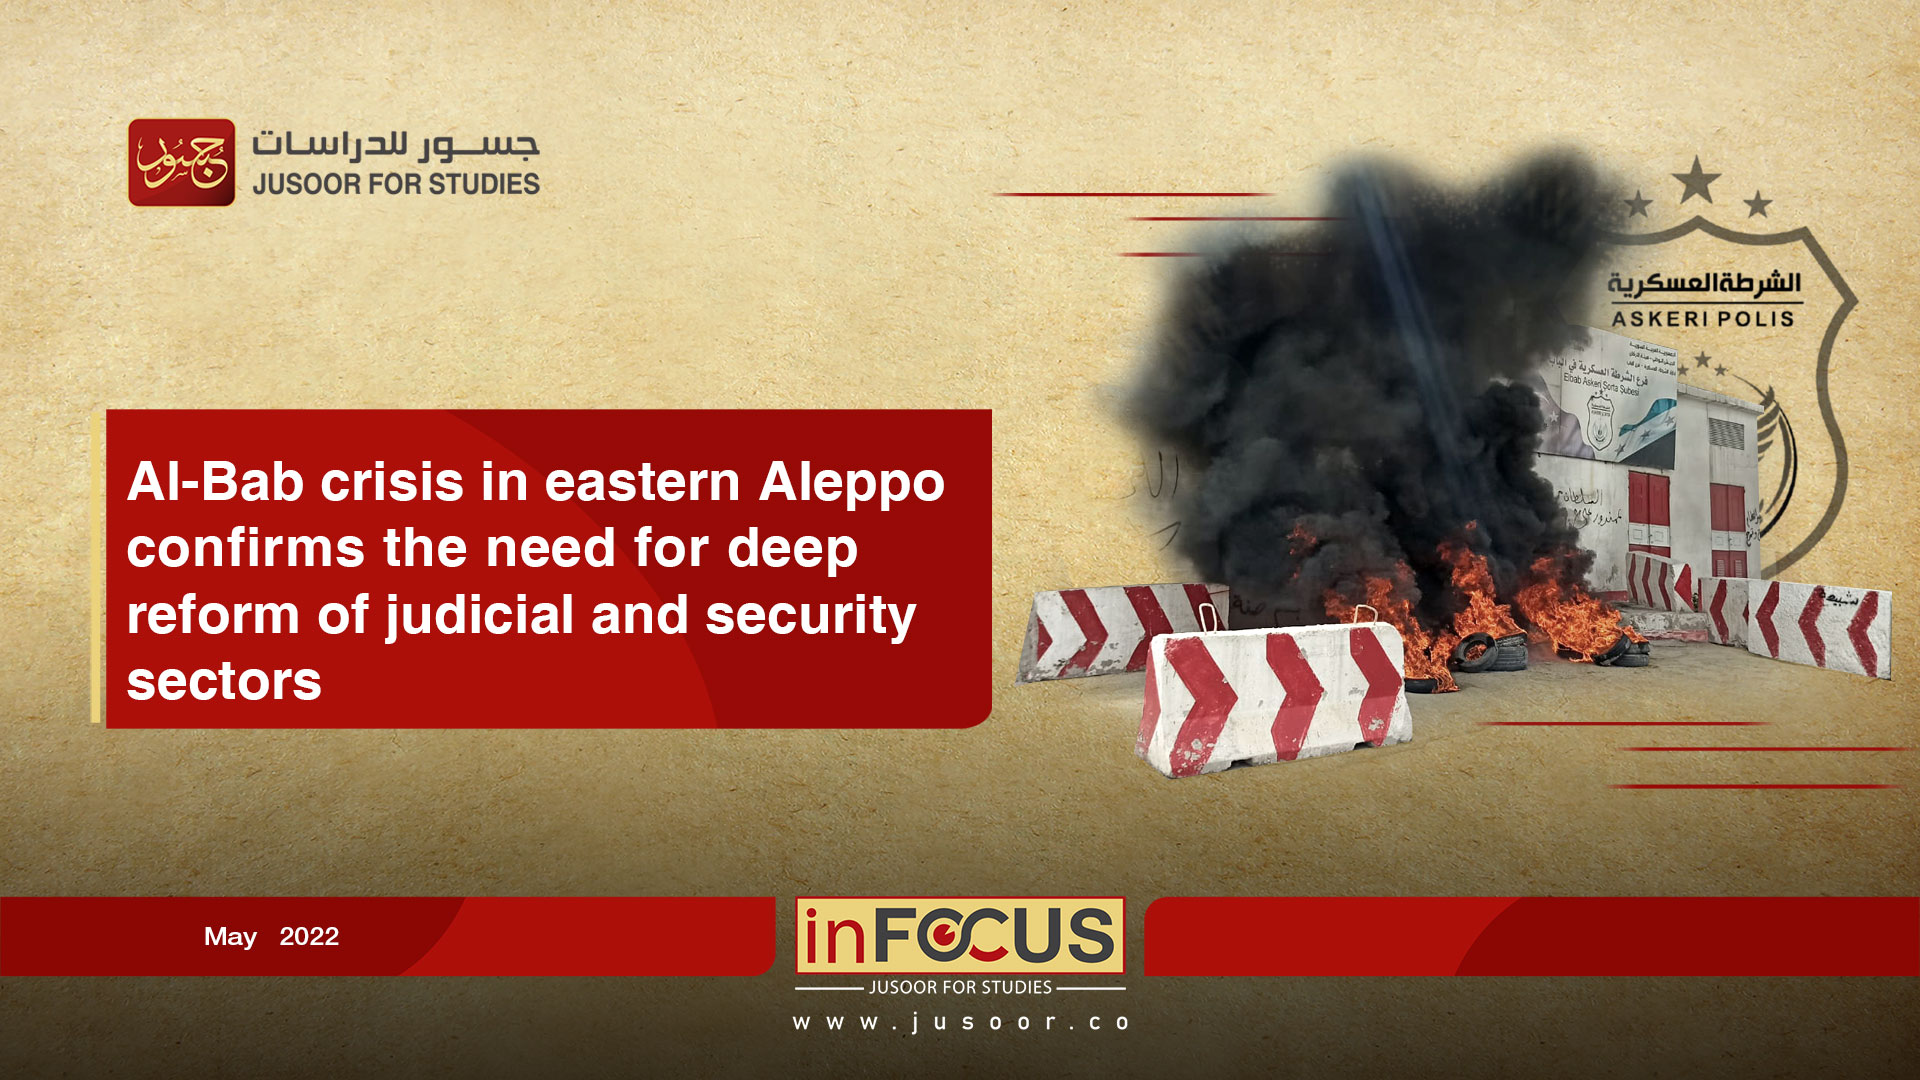 Al-Bab crisis in eastern Aleppo confirms the need for deep reform of judicial and security sectors